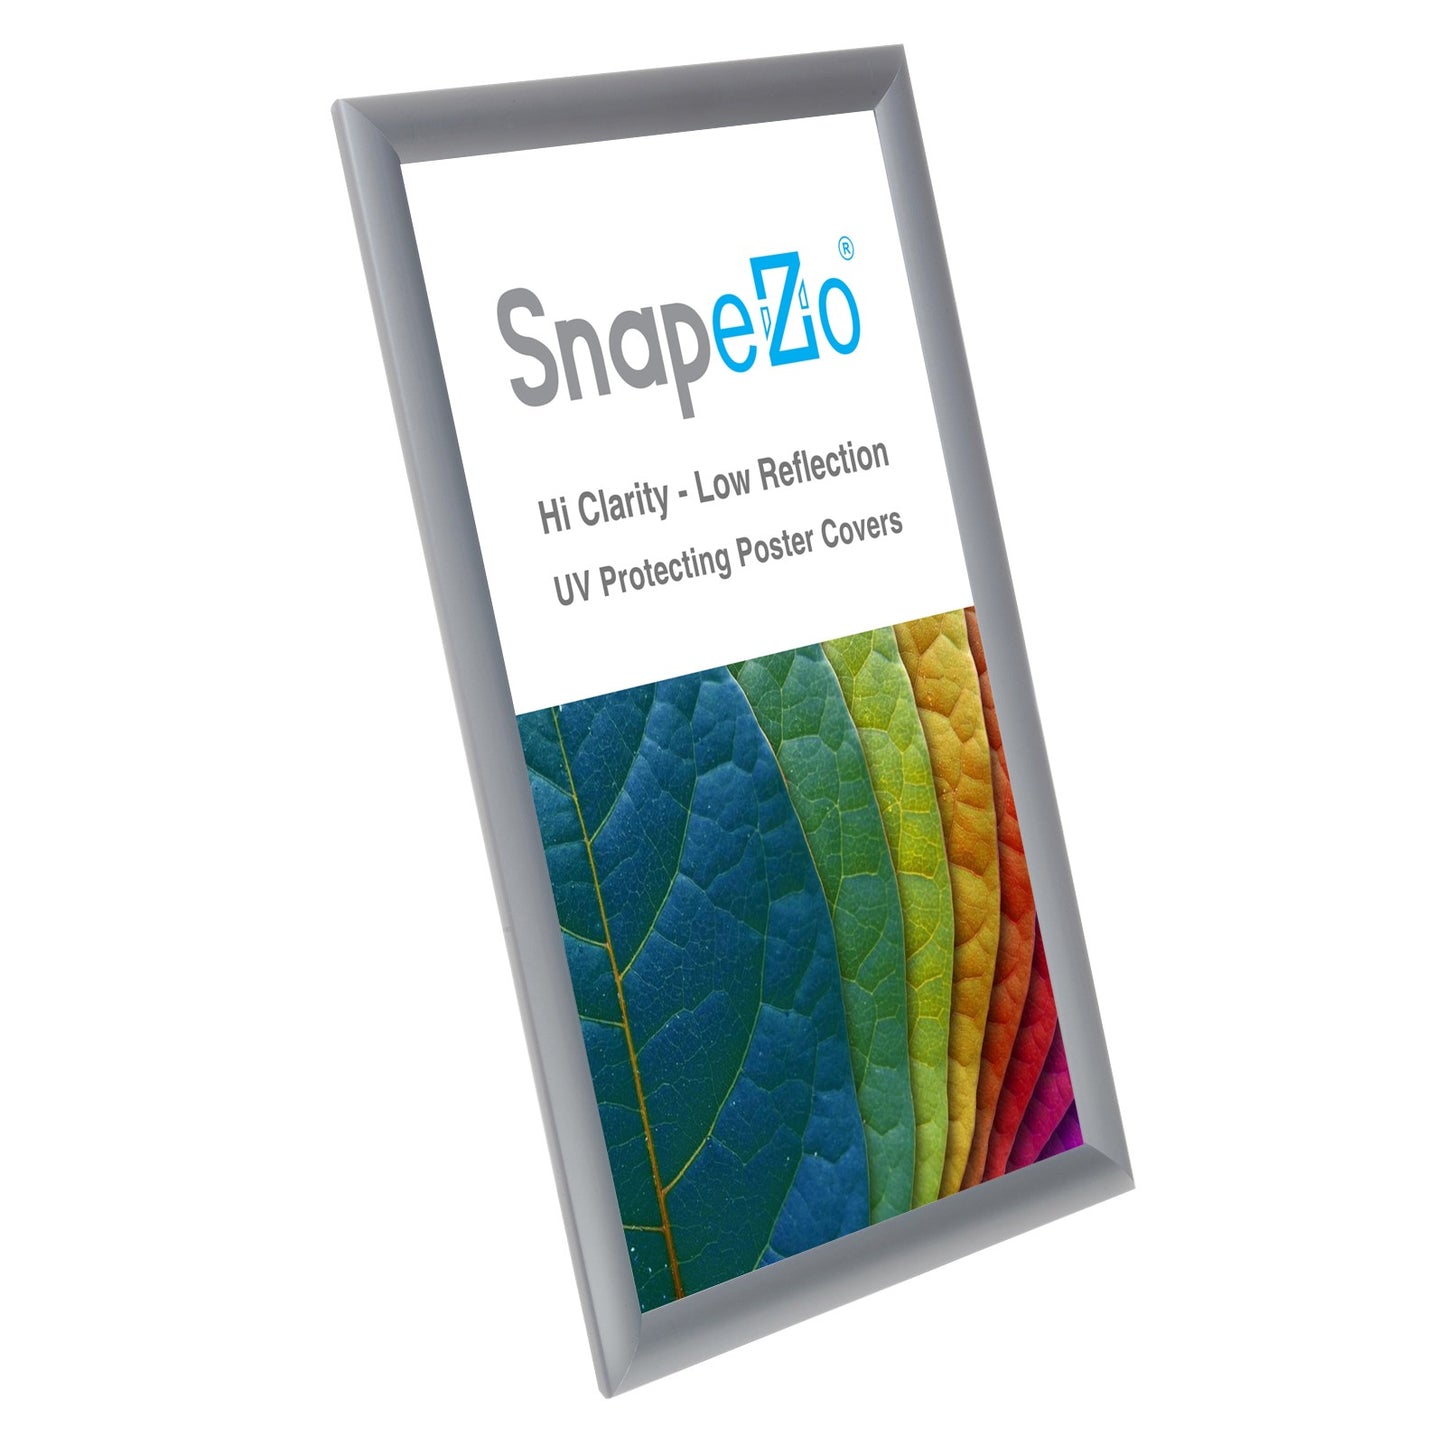 10 Case Pack of Snapezo® of Silver 11x17 Diploma Frame - 1" Profile